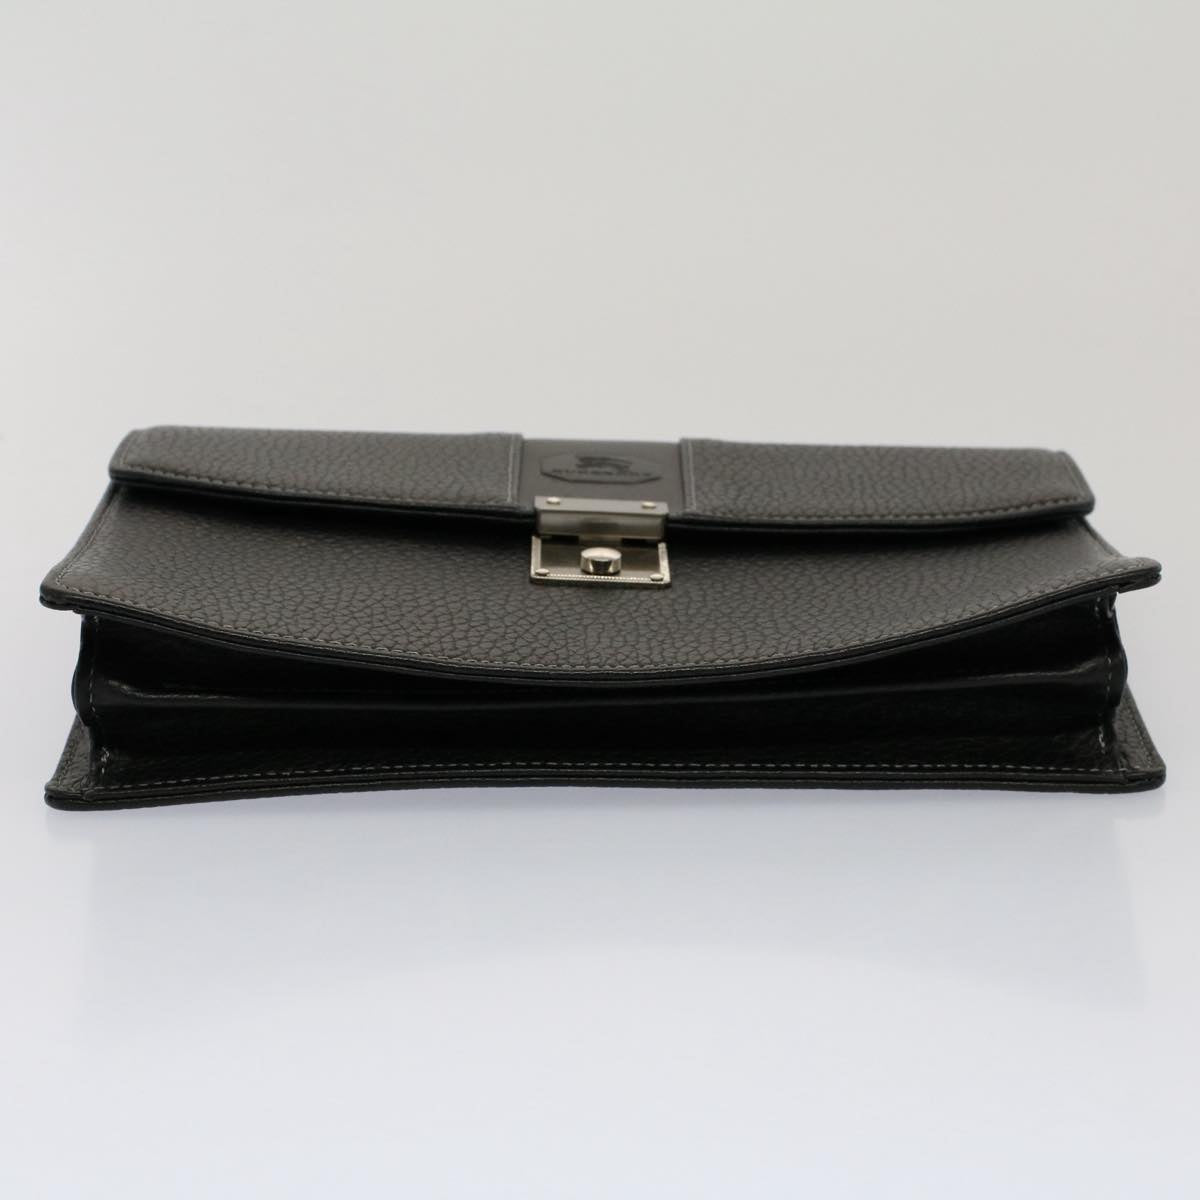 Burberry Clutch Bag Leather Black Auth Ep1686